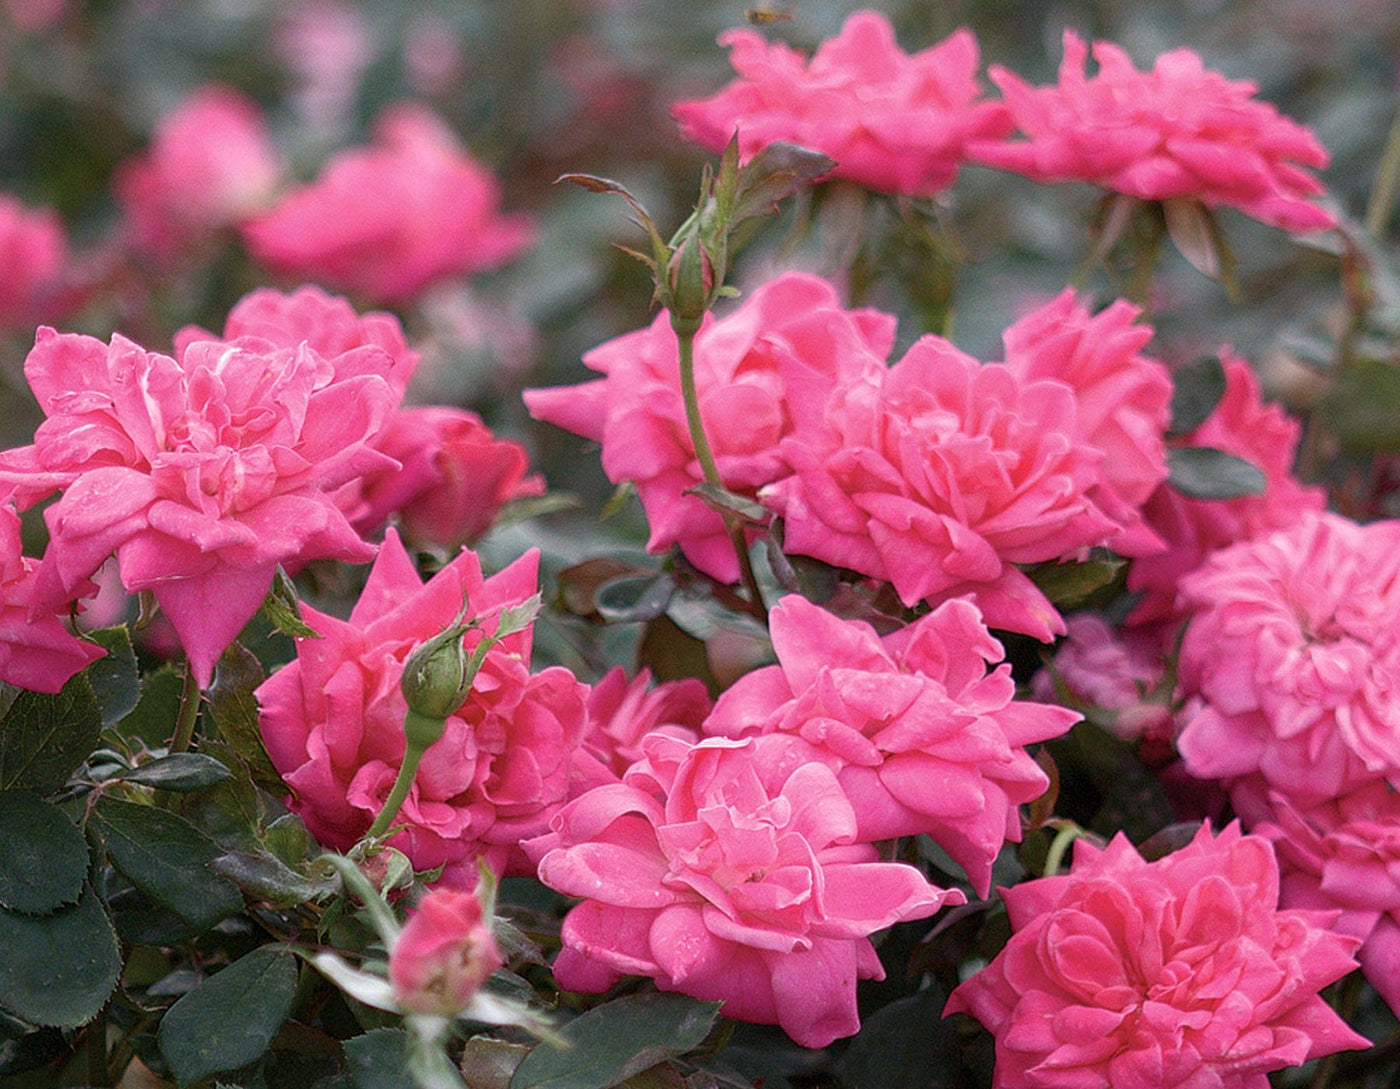 Star Double Knock Out - Star Roses and Plants